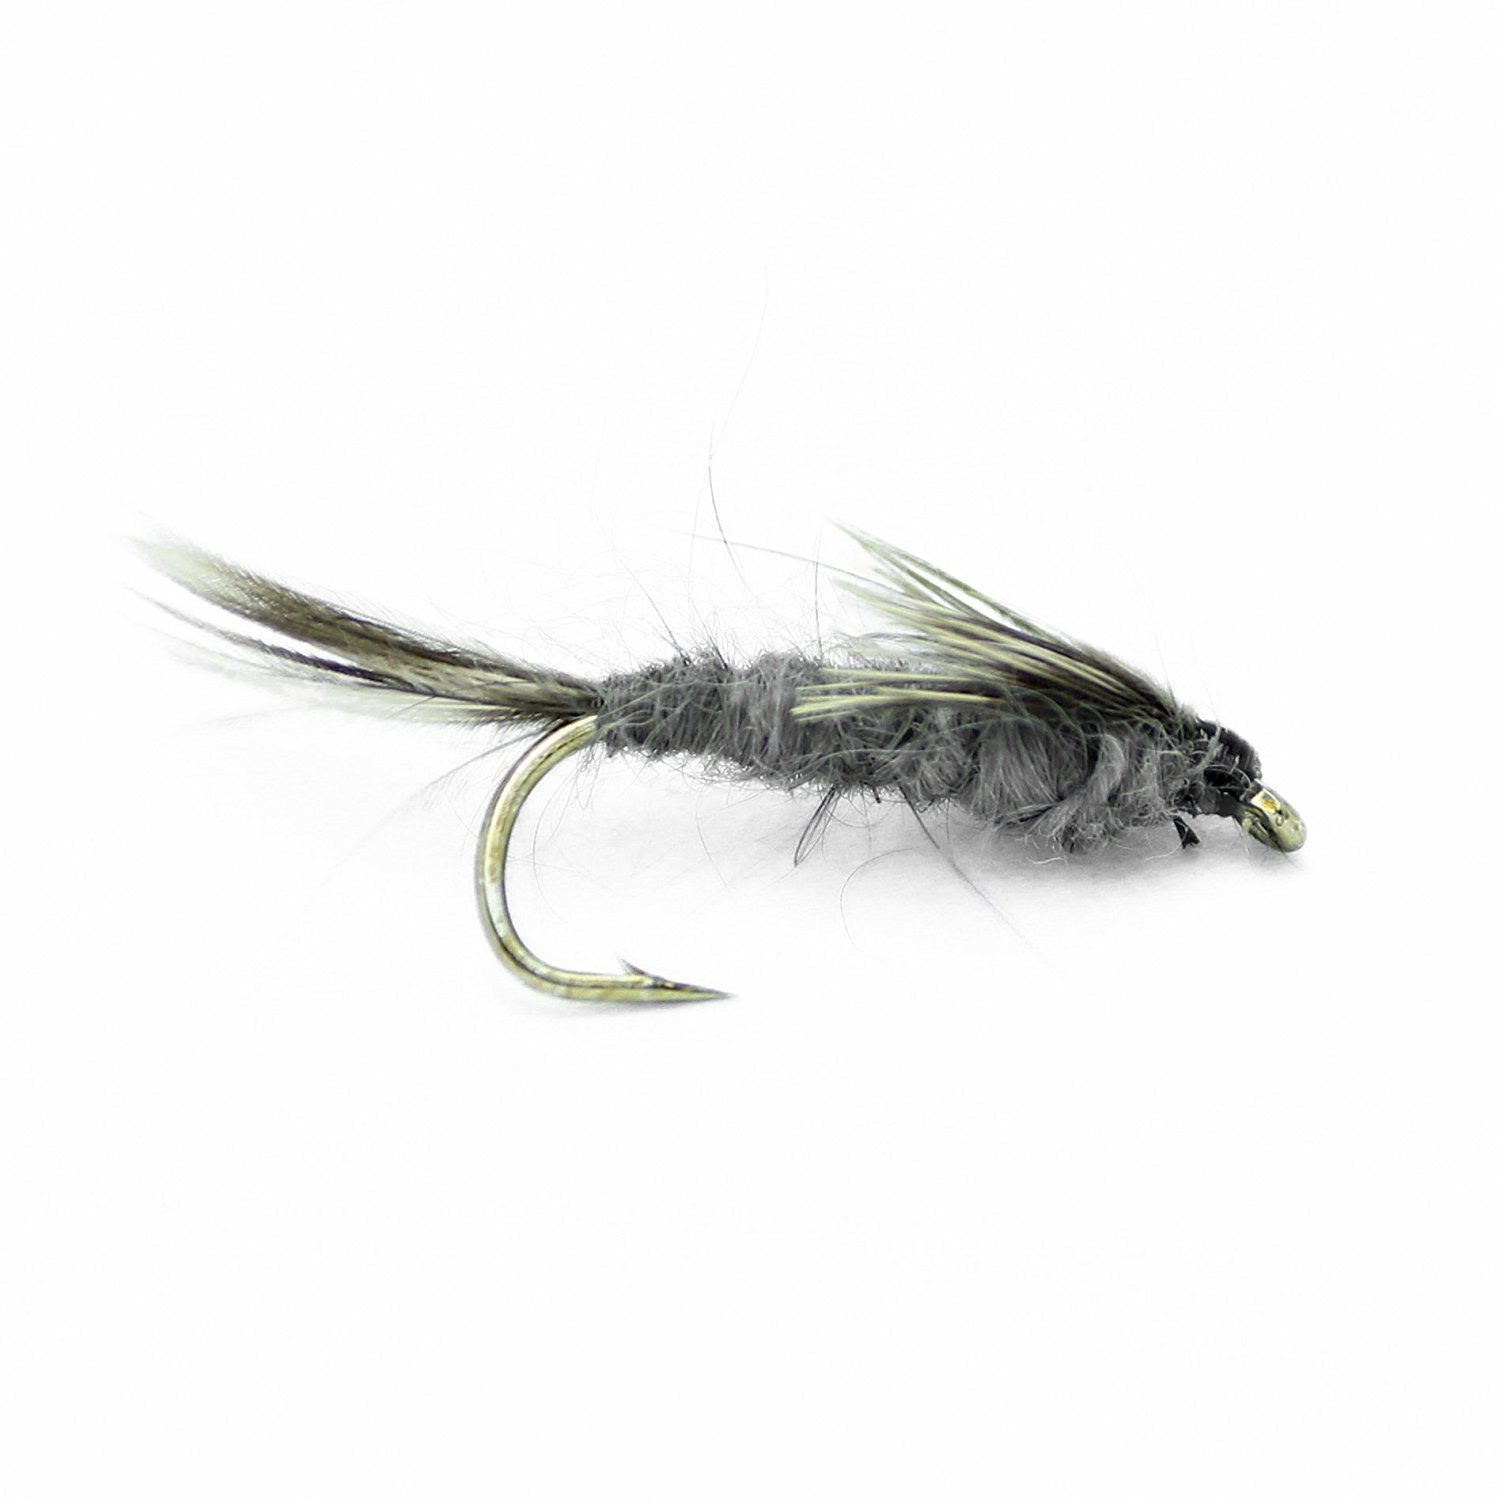 Fly Fishing Flies Assortment, Trout Fly Bait, 30 Flies